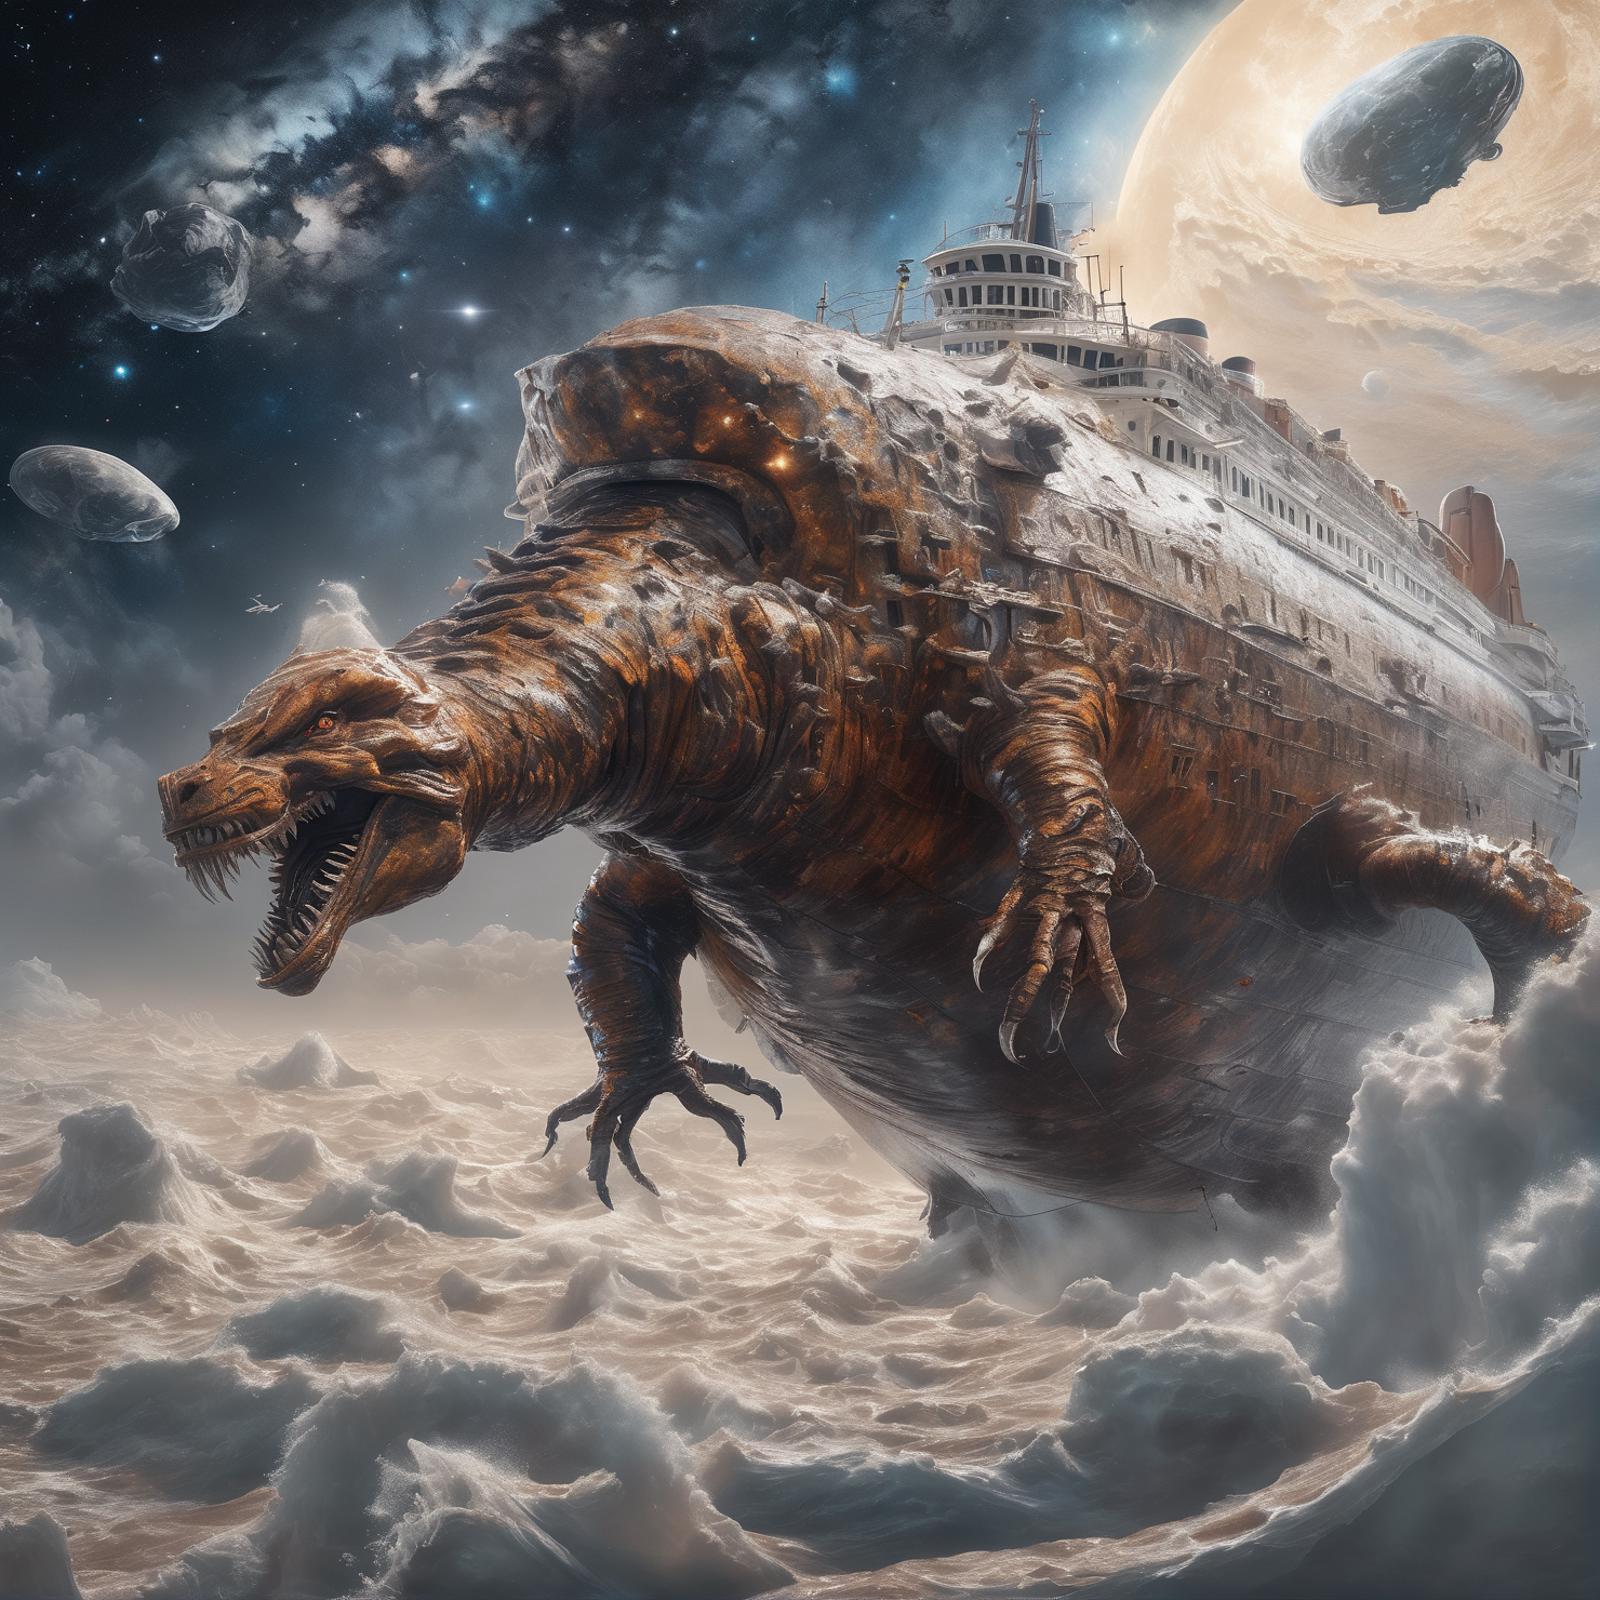 An artistic image of a giant turtle with a spaceship on its back.